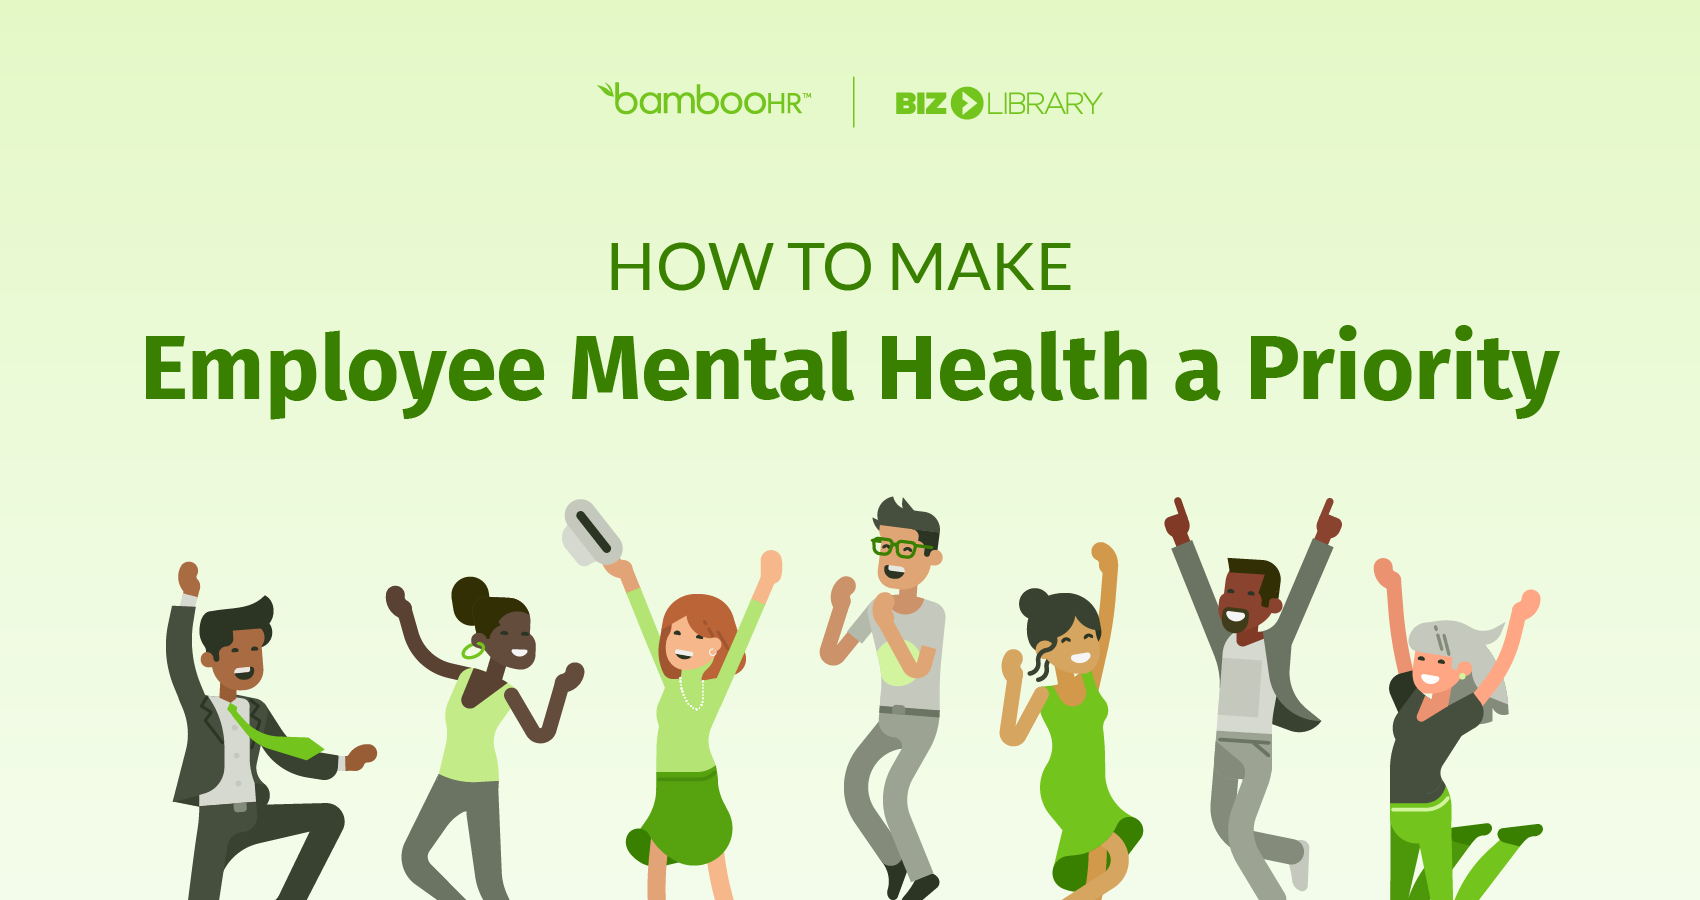 How to Make Employee Mental Health a Priority